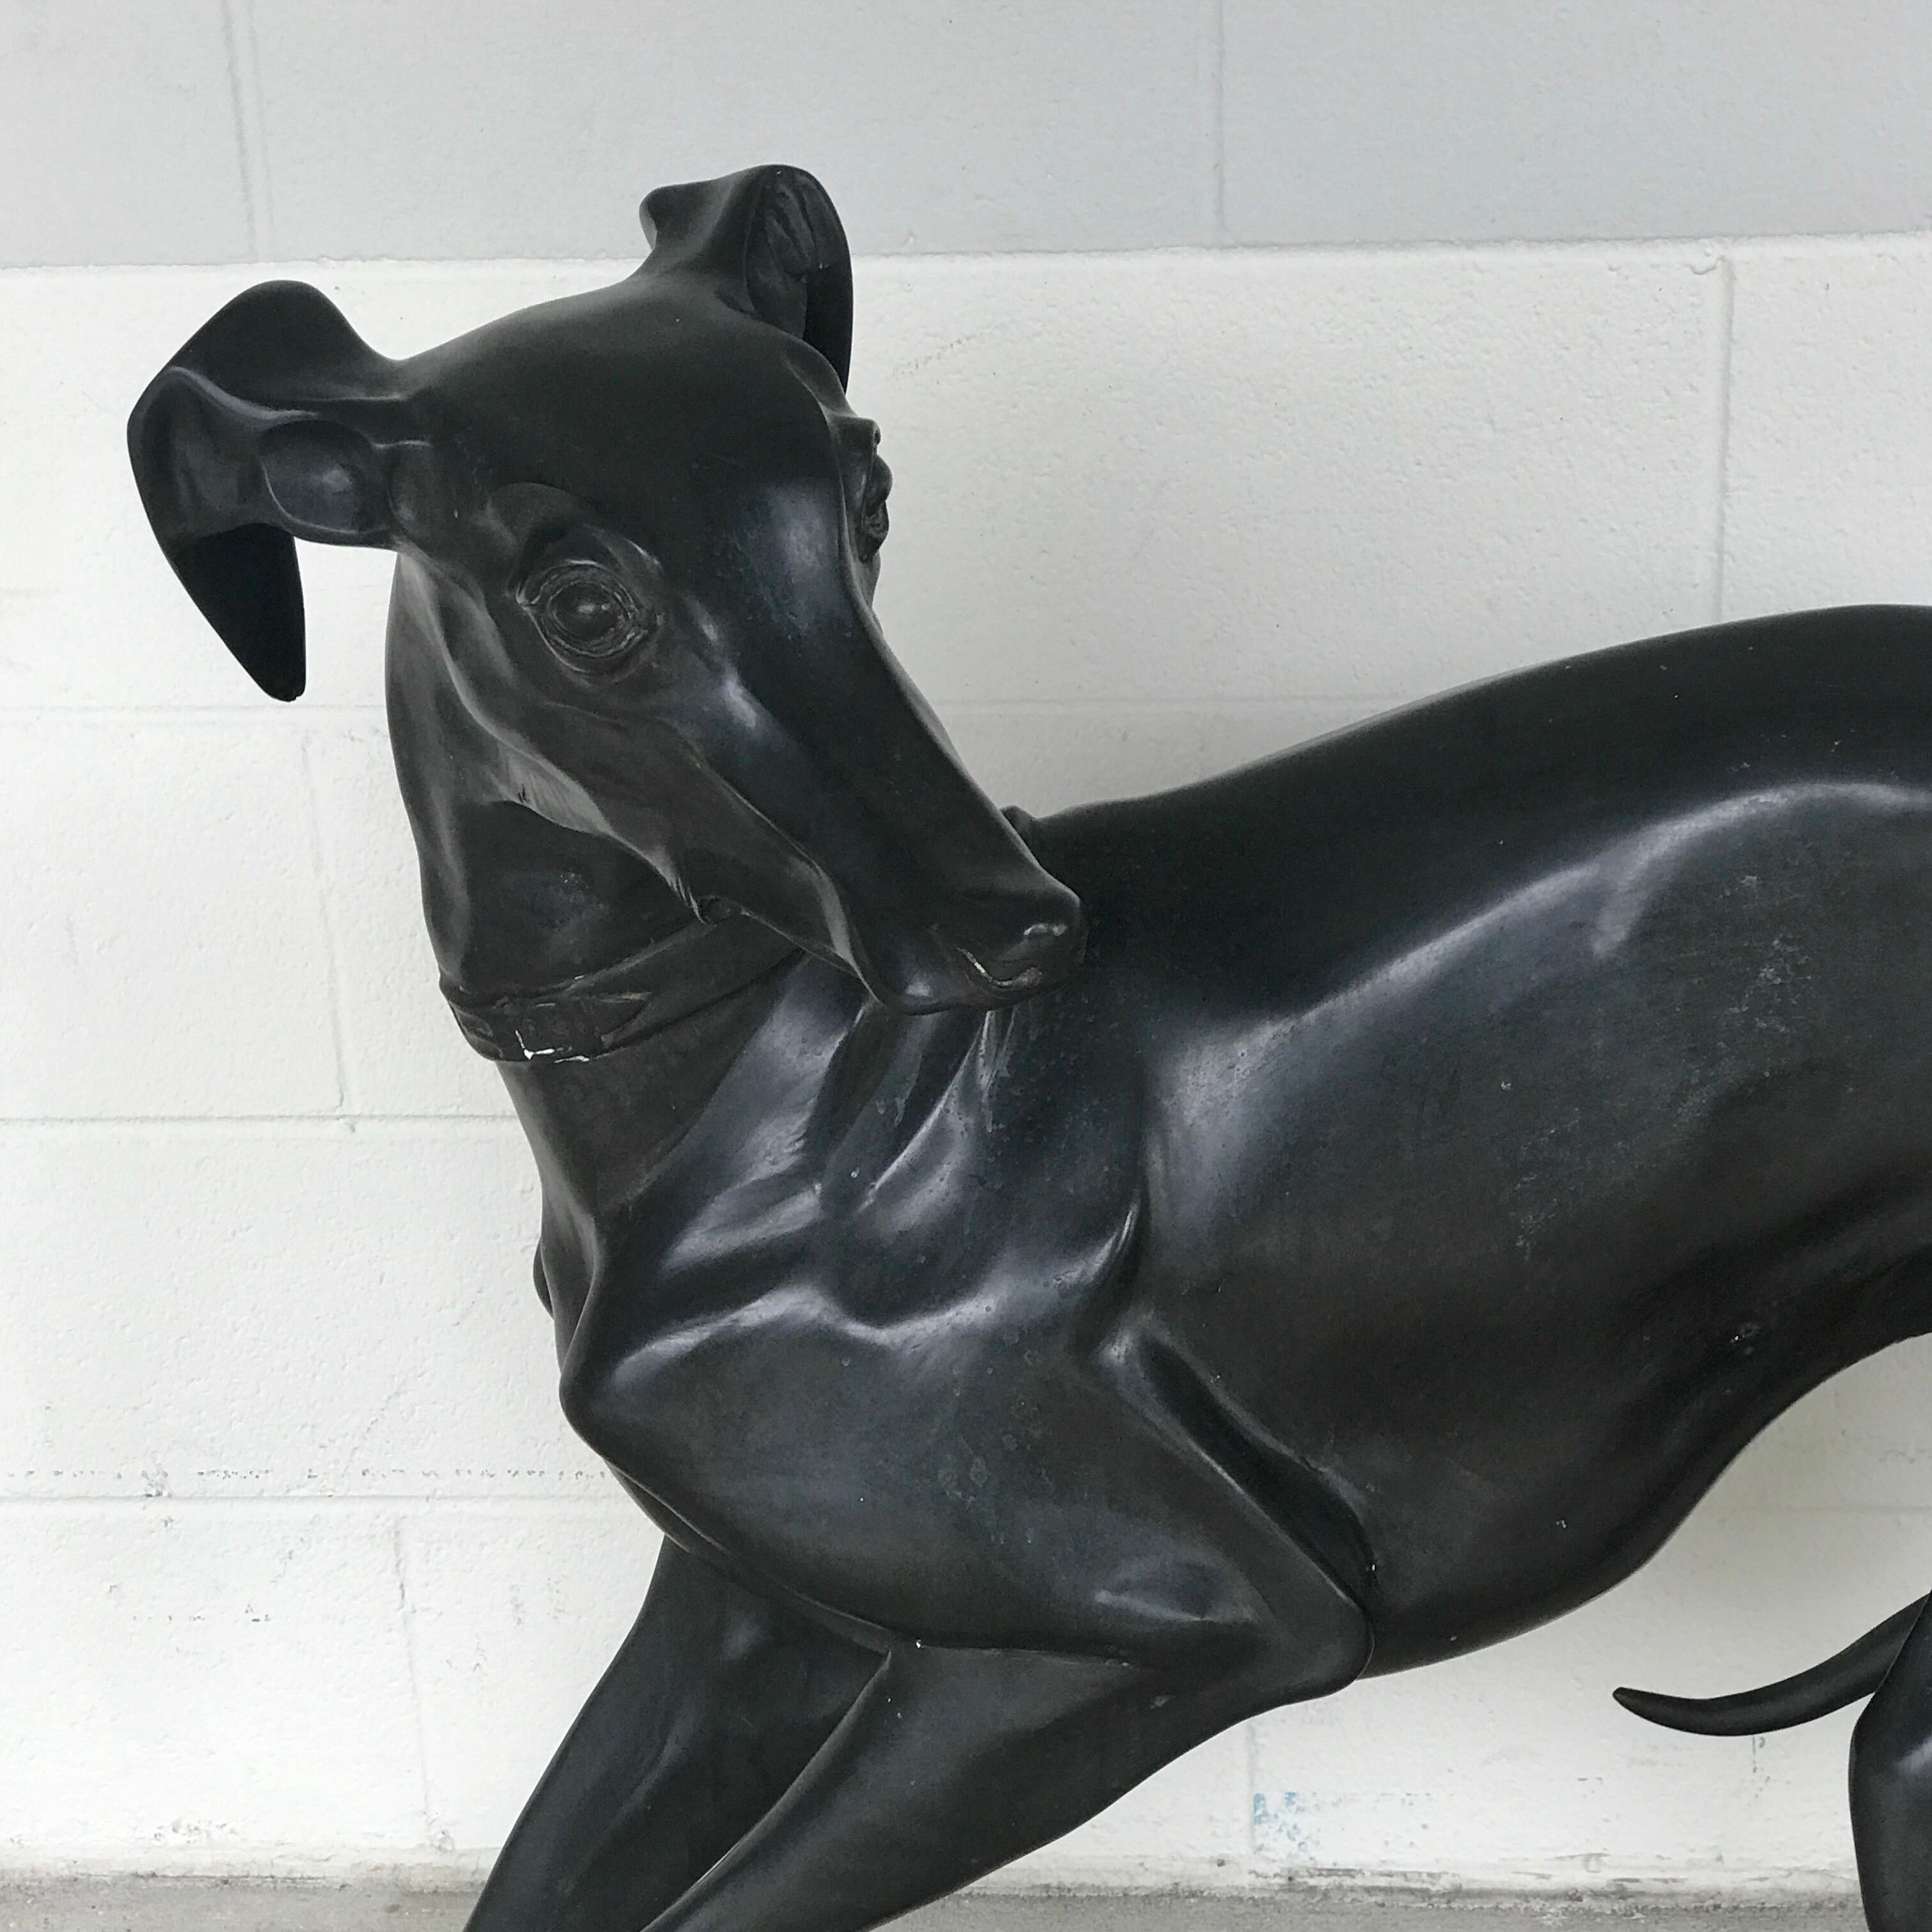 Large-scale French bronze whippet, nice casting of a larger than life collared whippet.